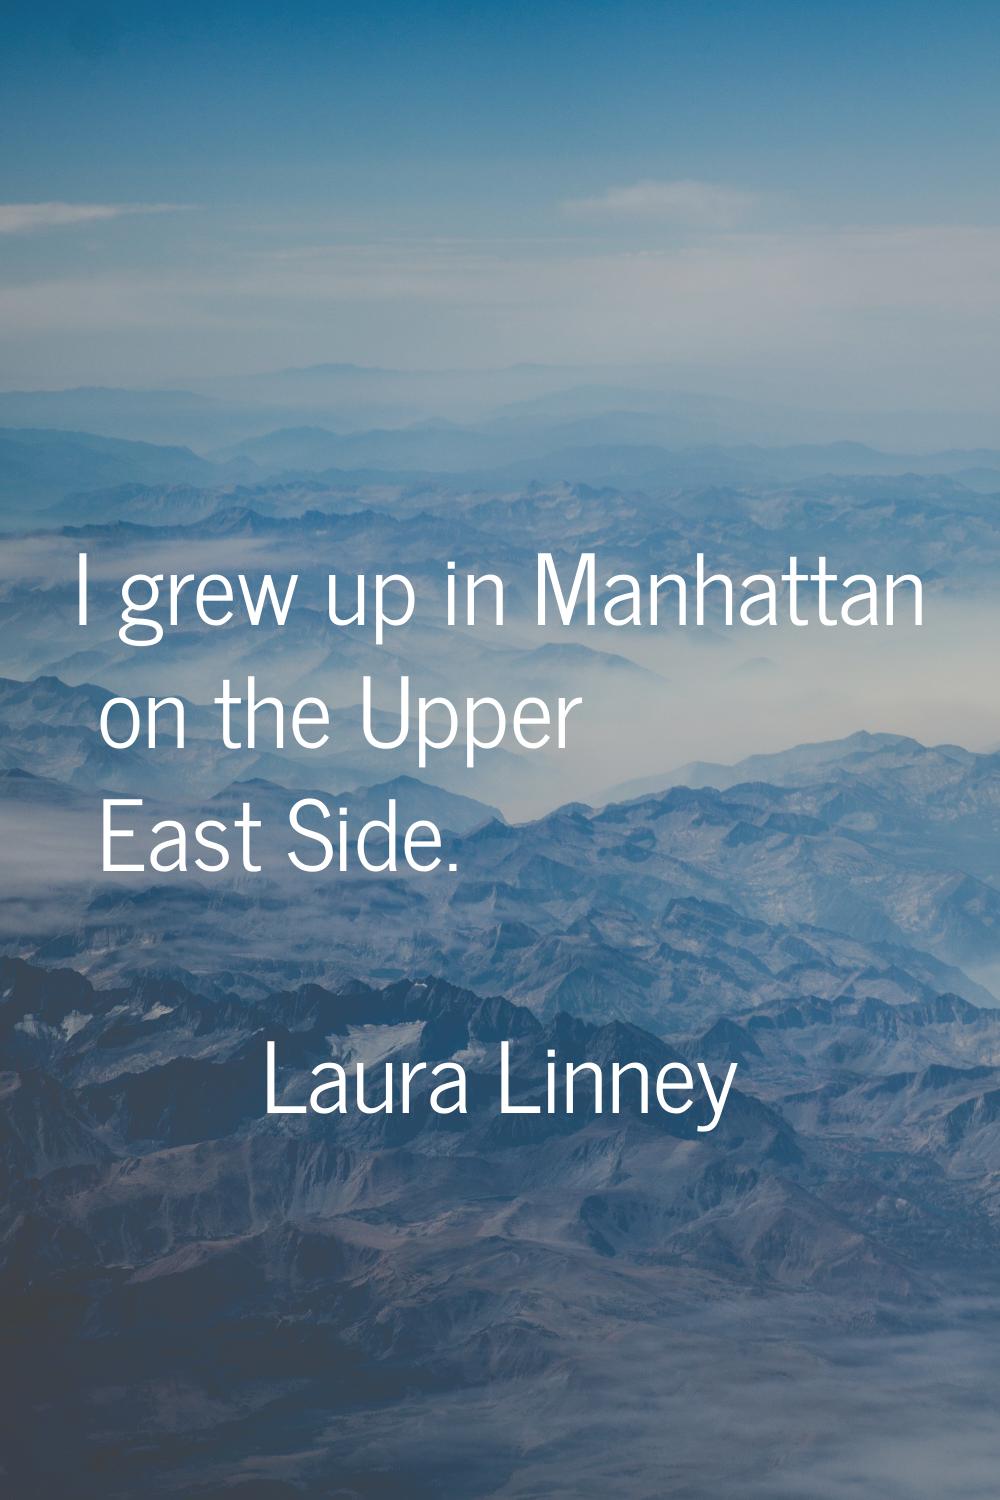 I grew up in Manhattan on the Upper East Side.